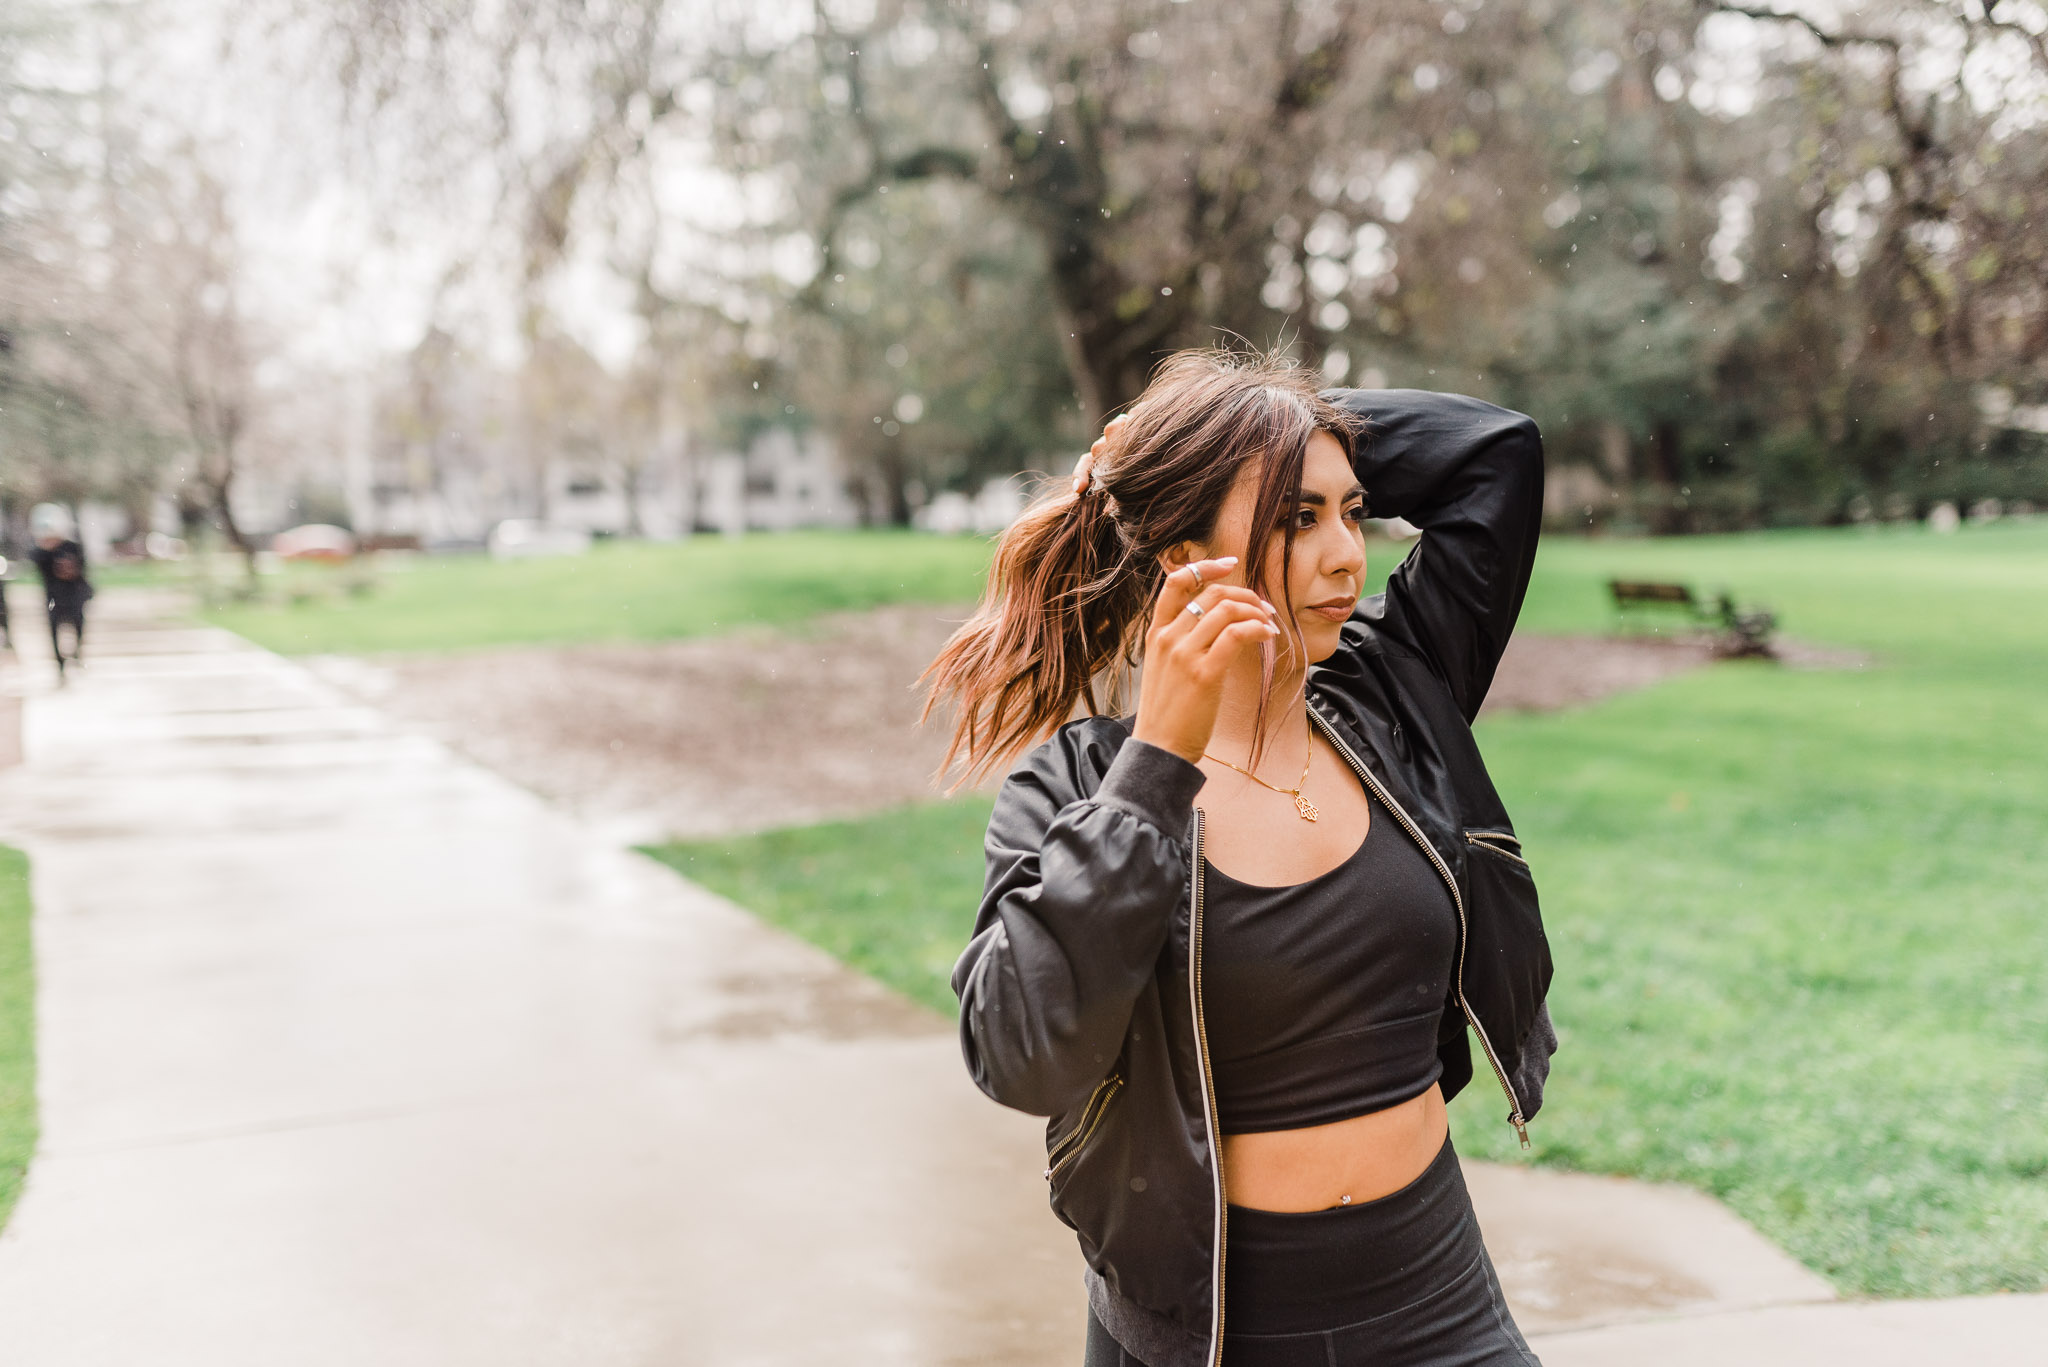 Fitness blogger wearing sports bra, legging, and windbreaker style jacket. Putting her hair in a ponytail.